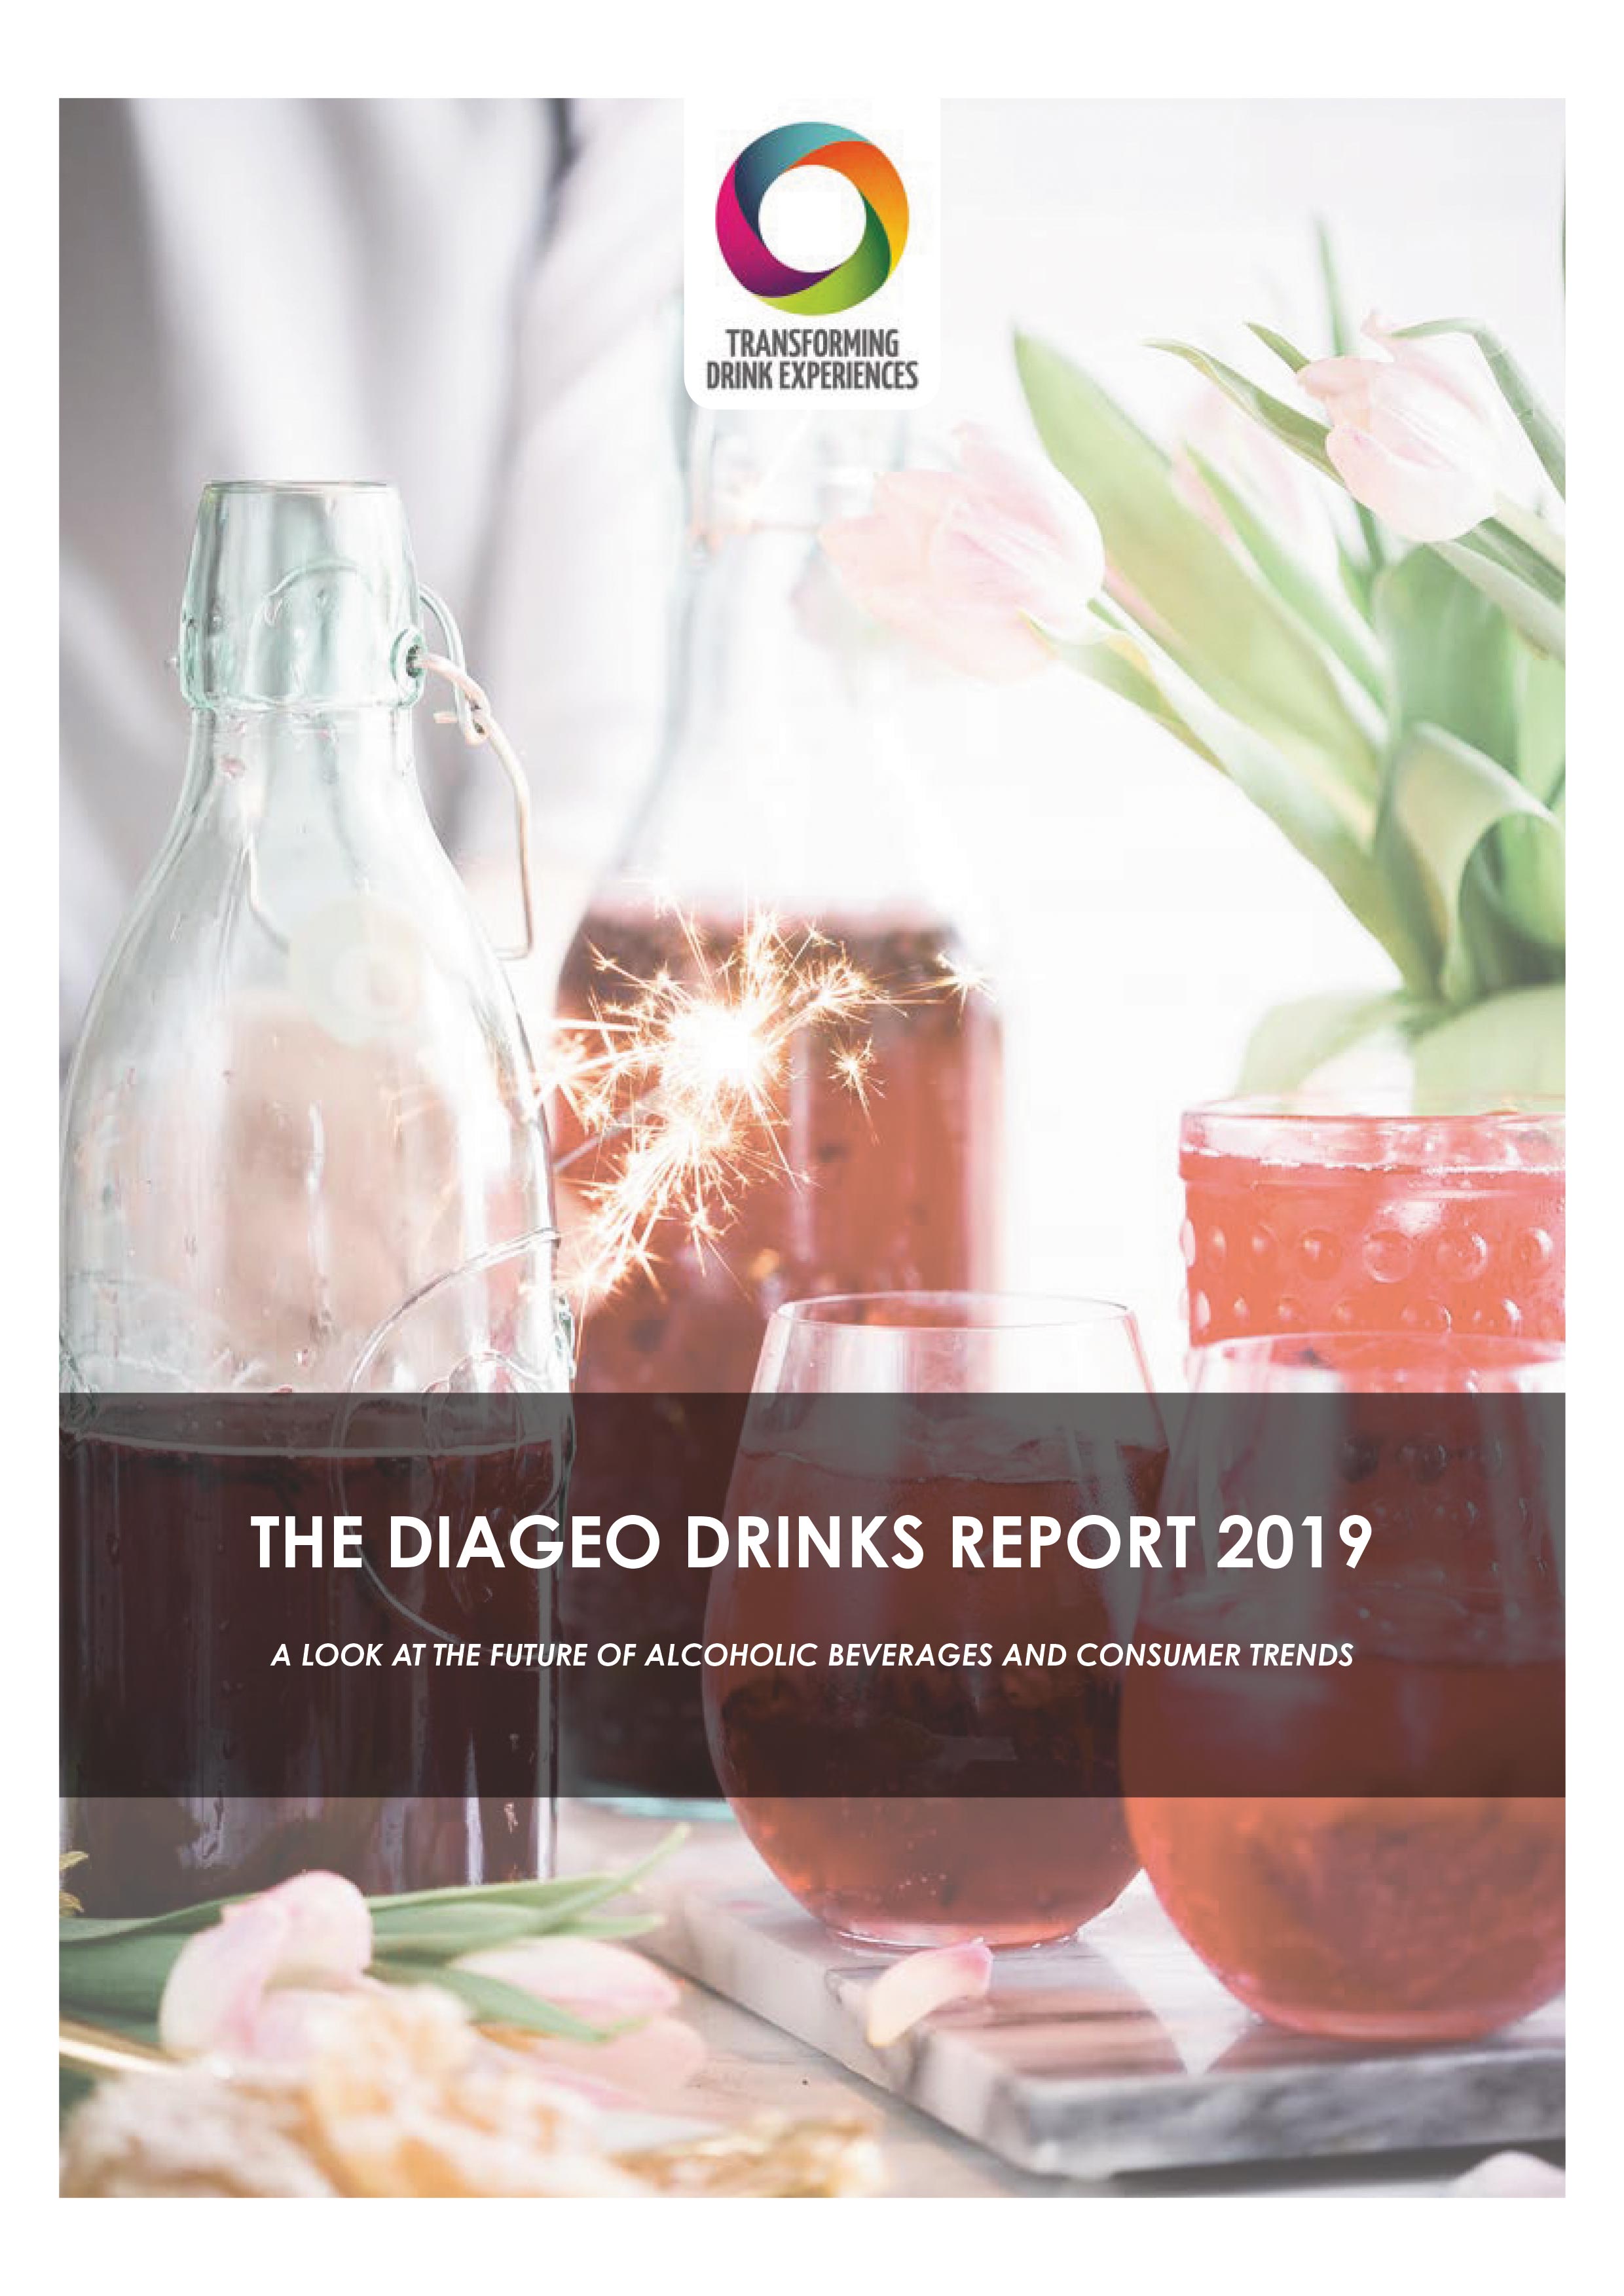 The Diageo Drinks Report takes a UK look at the future of alcoholic beverages and consumer trends.